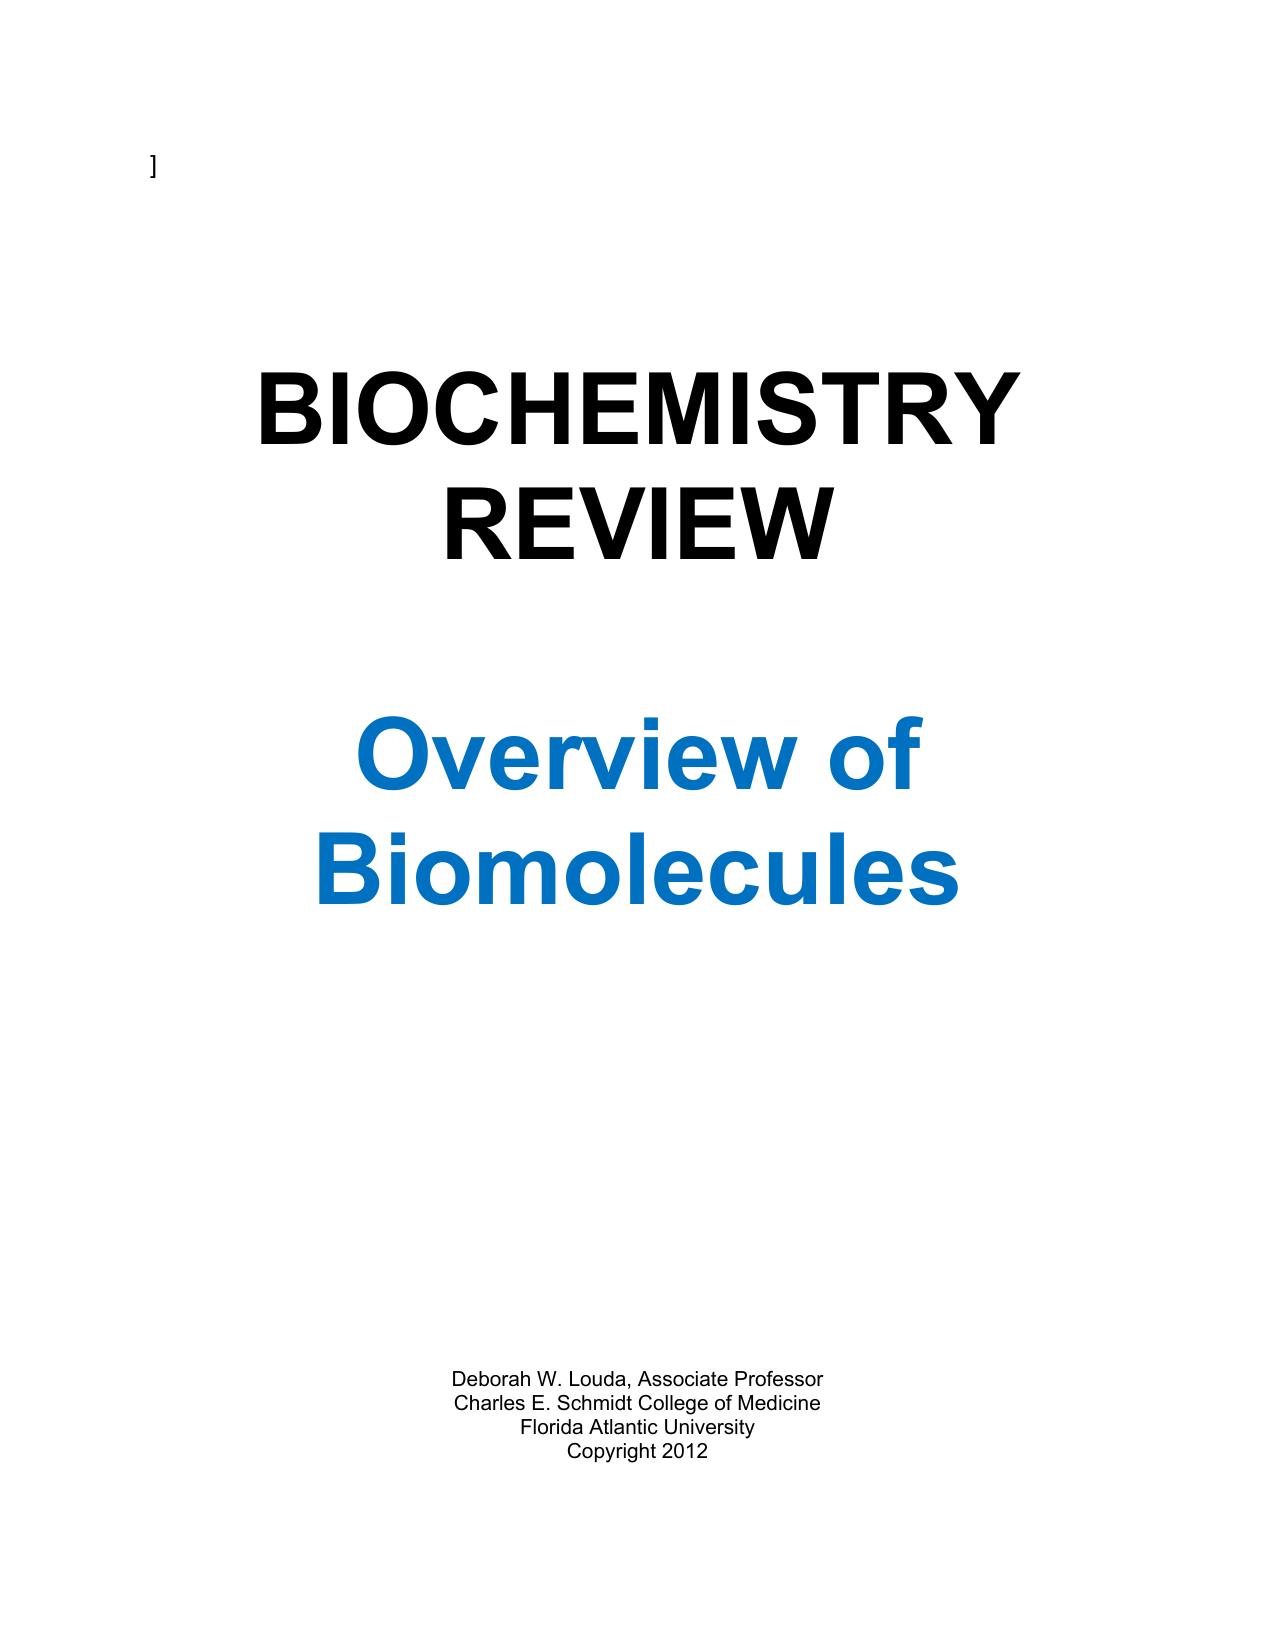 Microsoft Word - Overview of Biomolecules Book